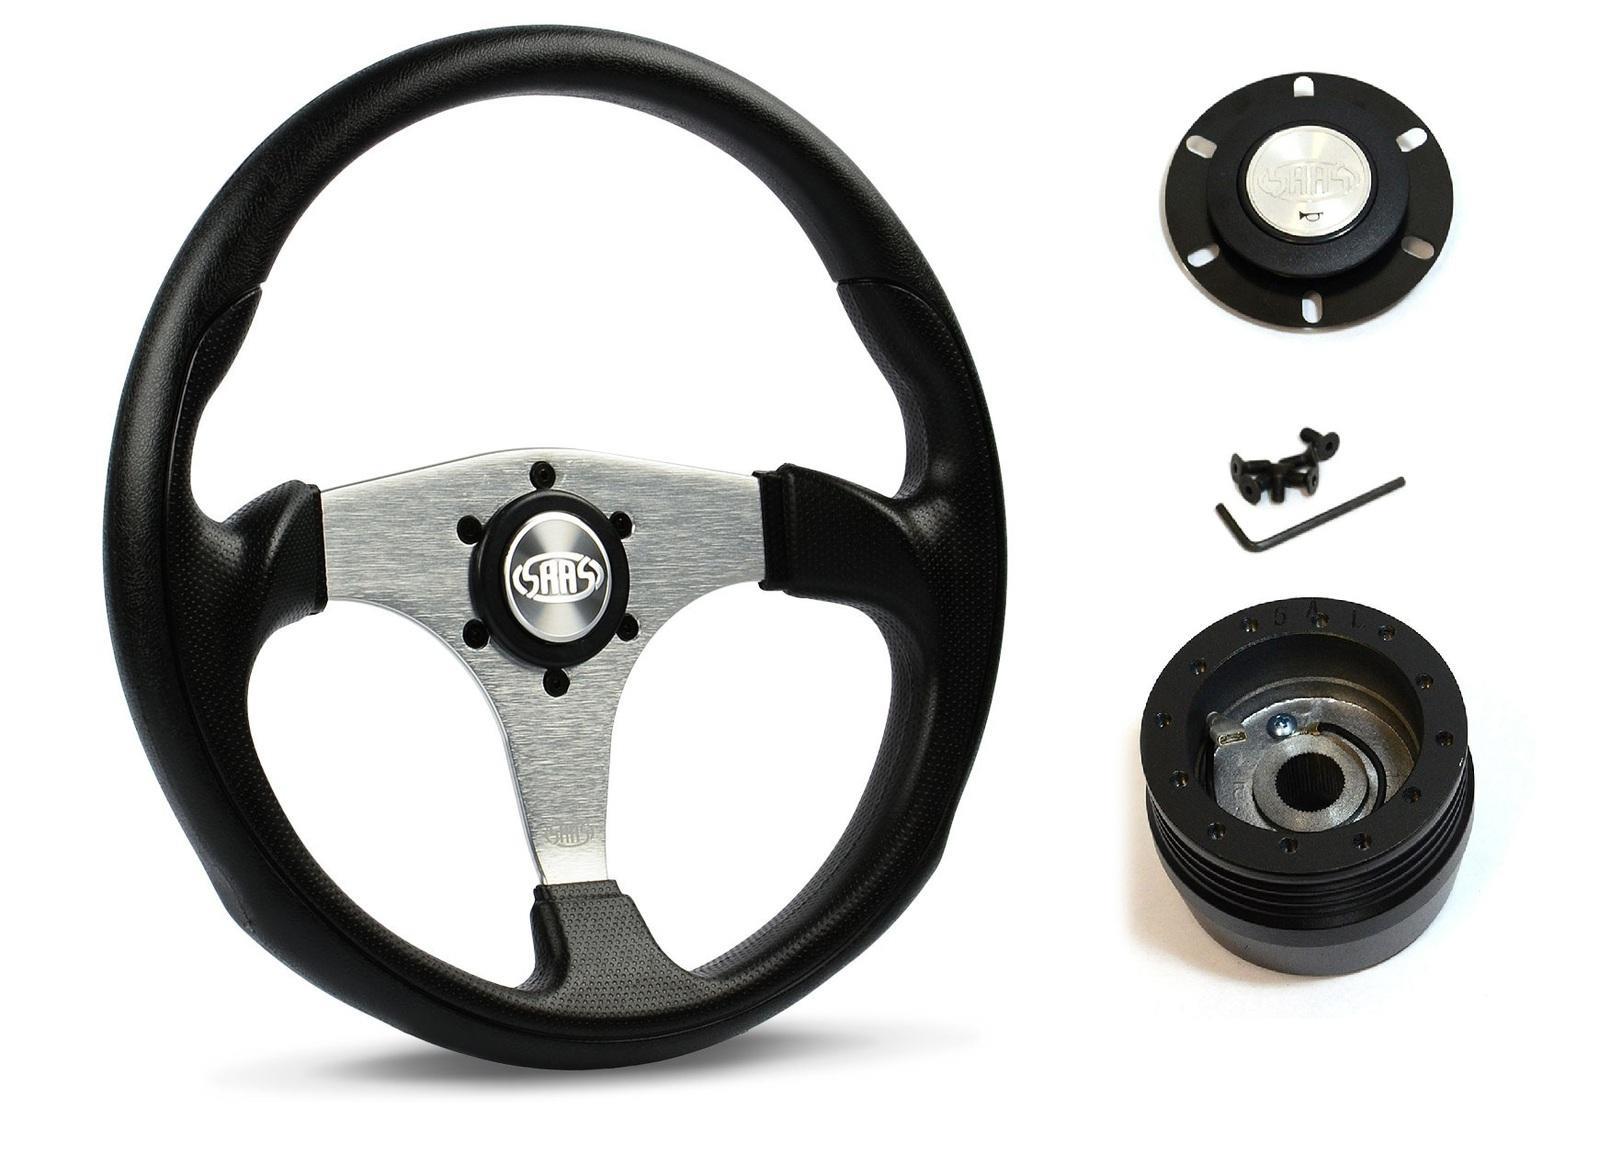 SAAS Steering Wheel Poly 14" ADR Octane Brushed Alloy Spoke SW515S-R and SAAS boss kit for Ford Corsair All Models 1988-1996